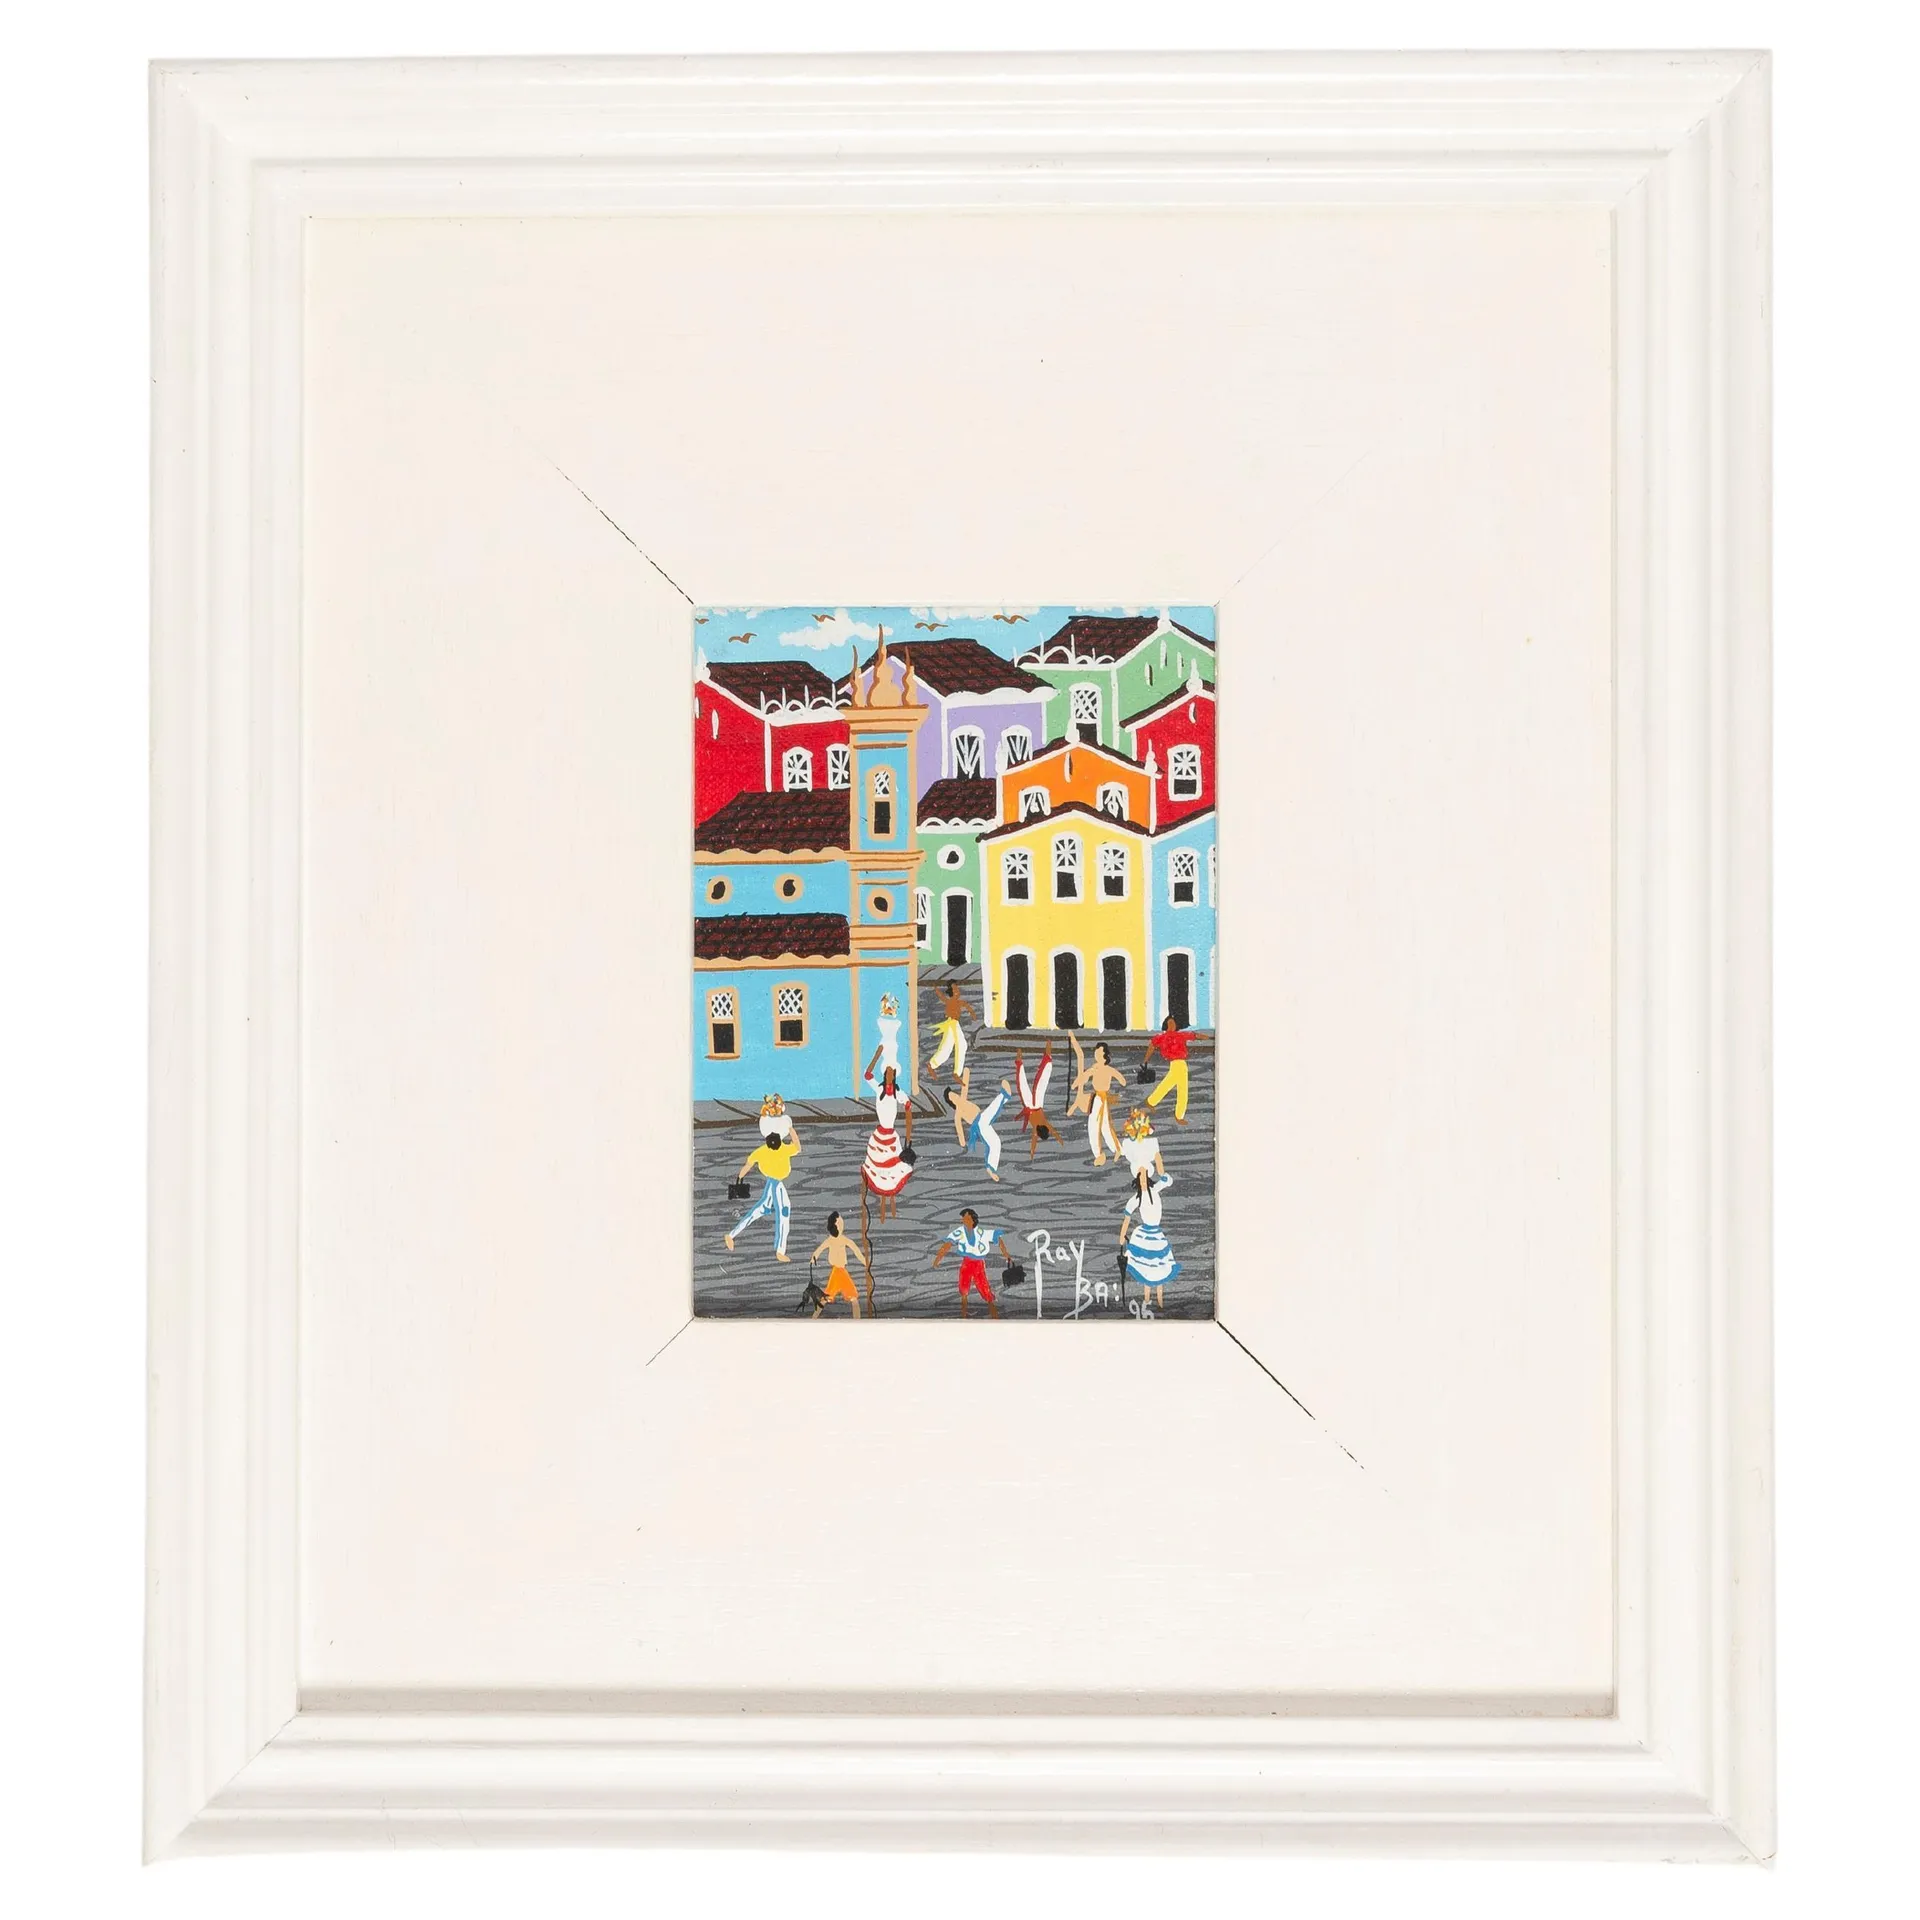 Small Oil Painting, White Wood Frame, The City, Ray Bai, 1995